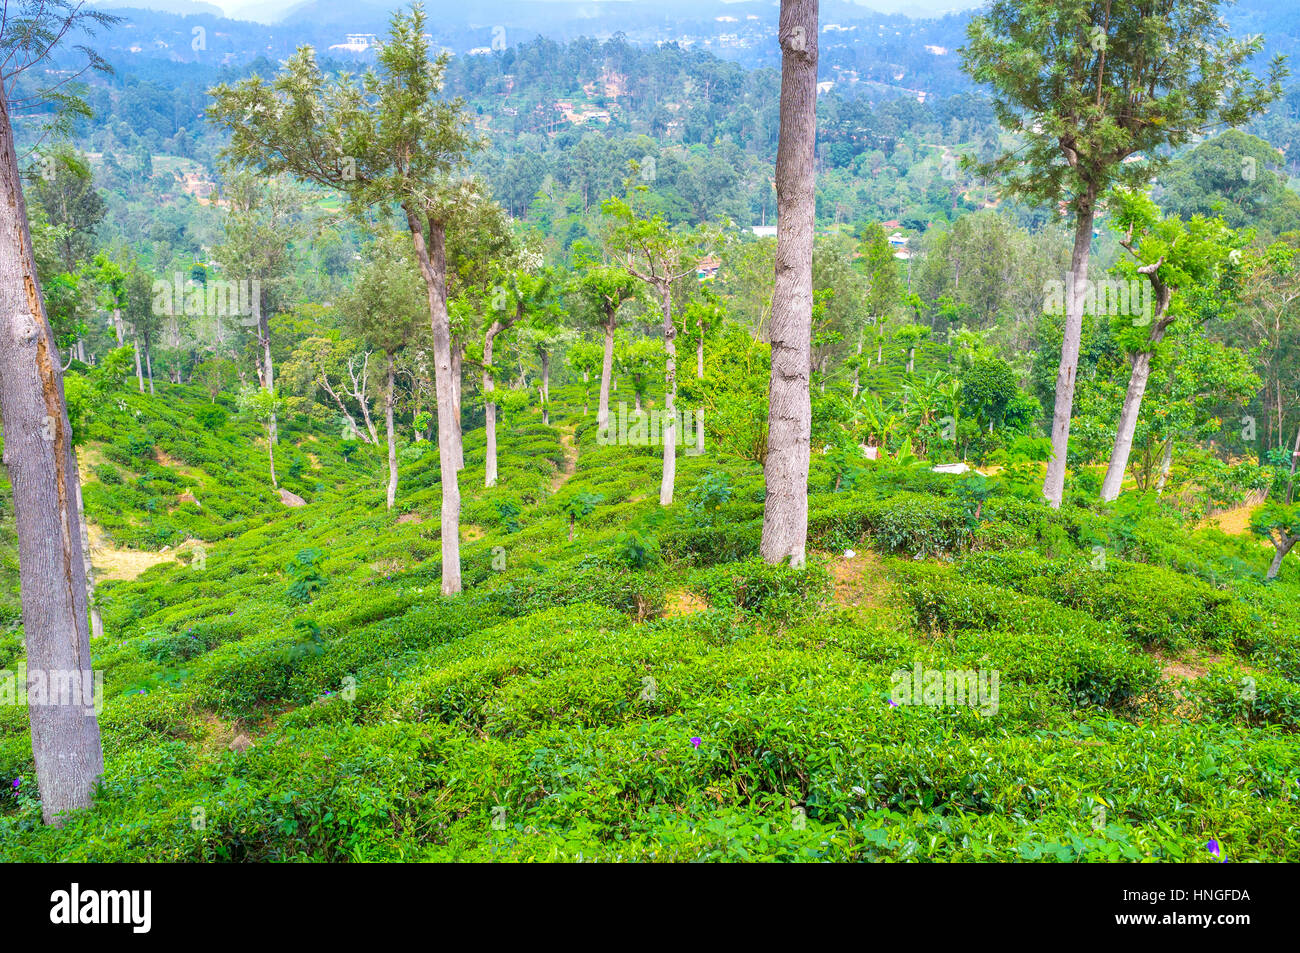 Tea is the most cultivated crop in Sri Lanka that grows on the best hill of the island Stock Photo